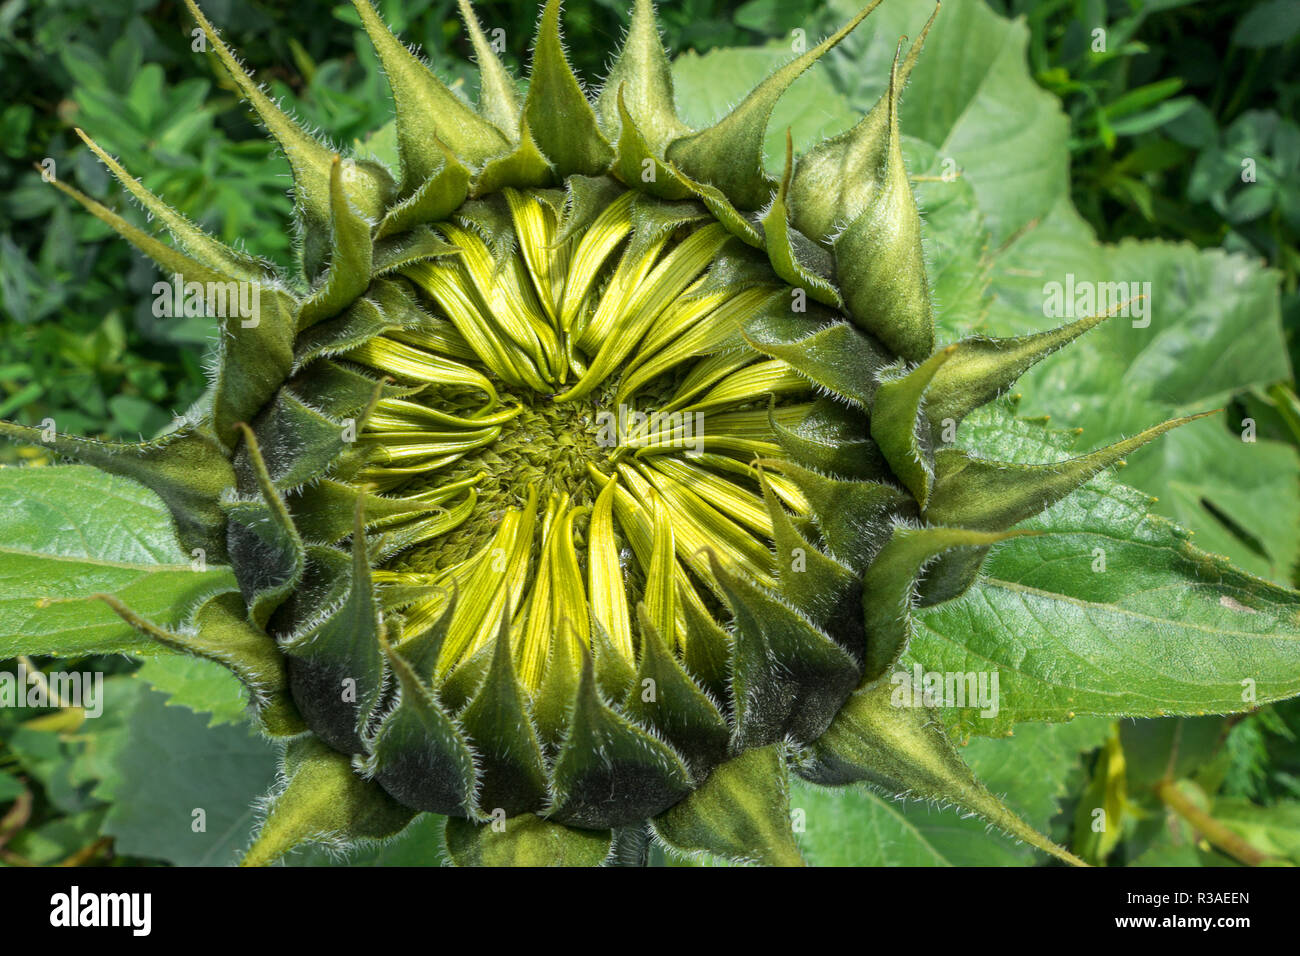 bud of a sunflower Stock Photo